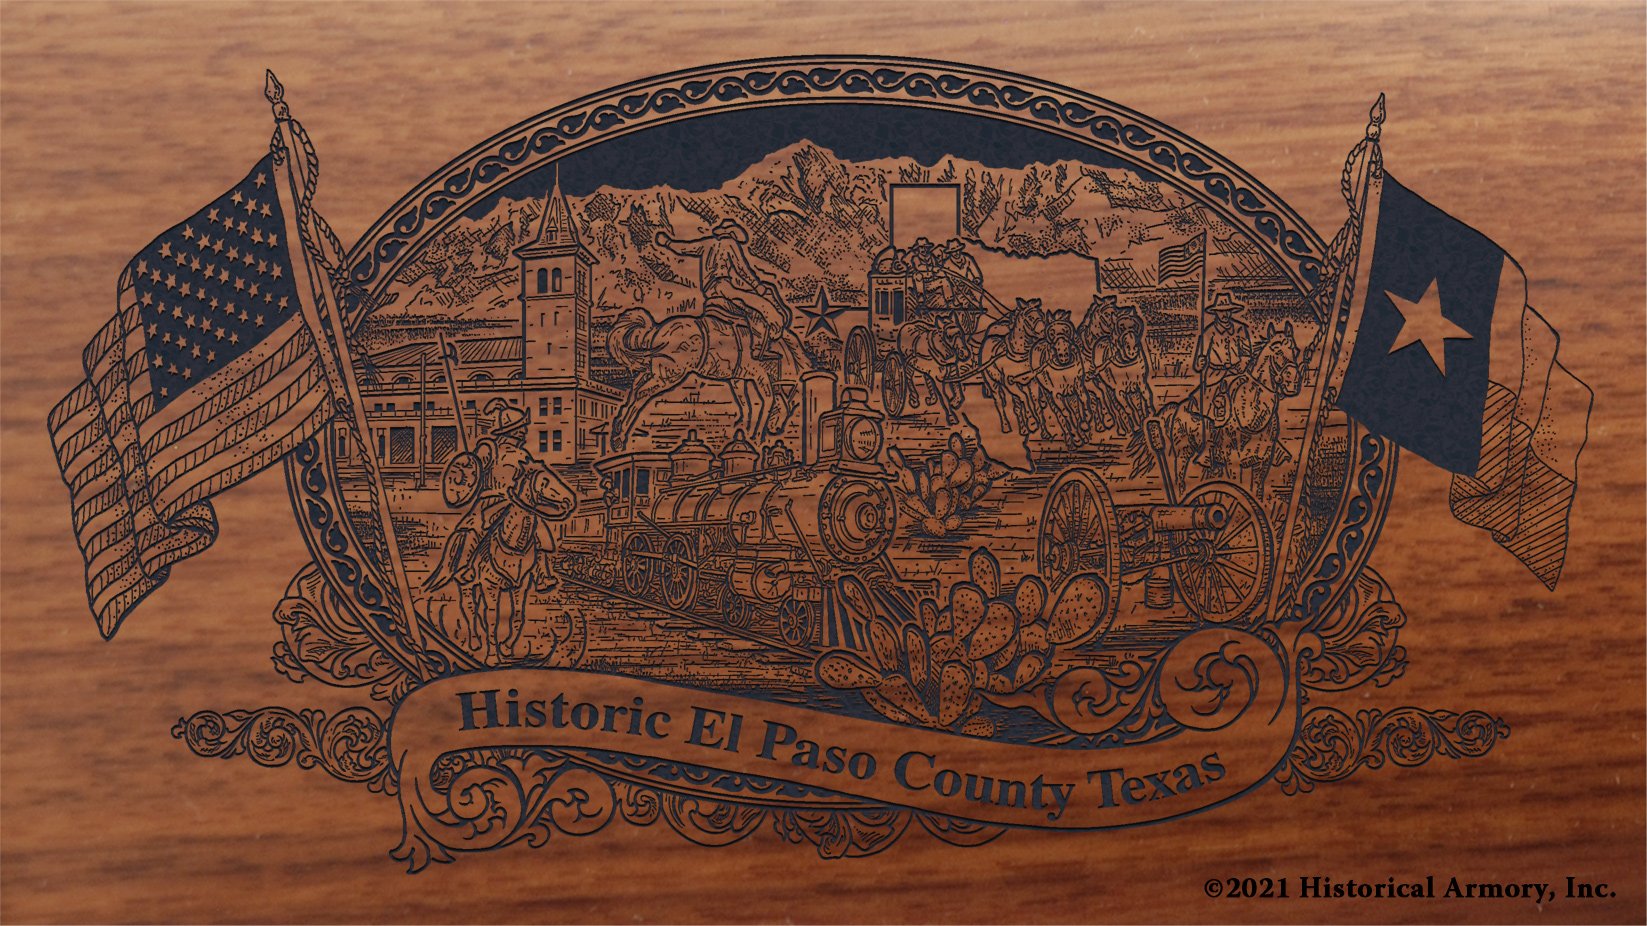 Engraved artwork | History of El Paso County Texas | Historical Armory